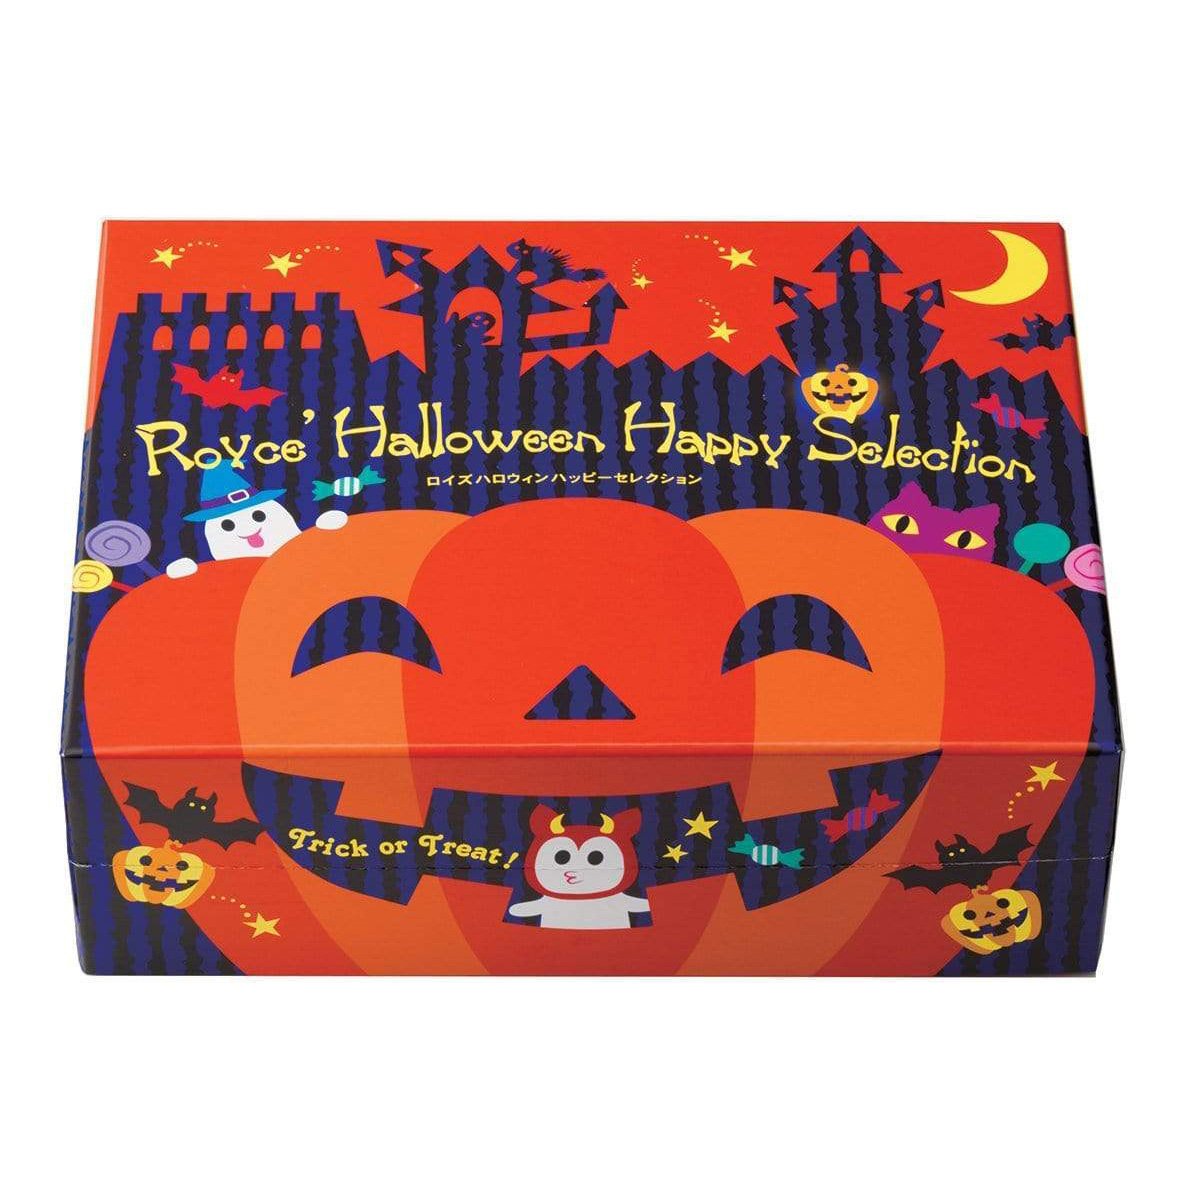 Image shows an orange box with illustrations of ghosts, animals, stars, and pumpkins. Text above says ROYCE' Halloween Happy Selection. Text below says Trick or Treat!